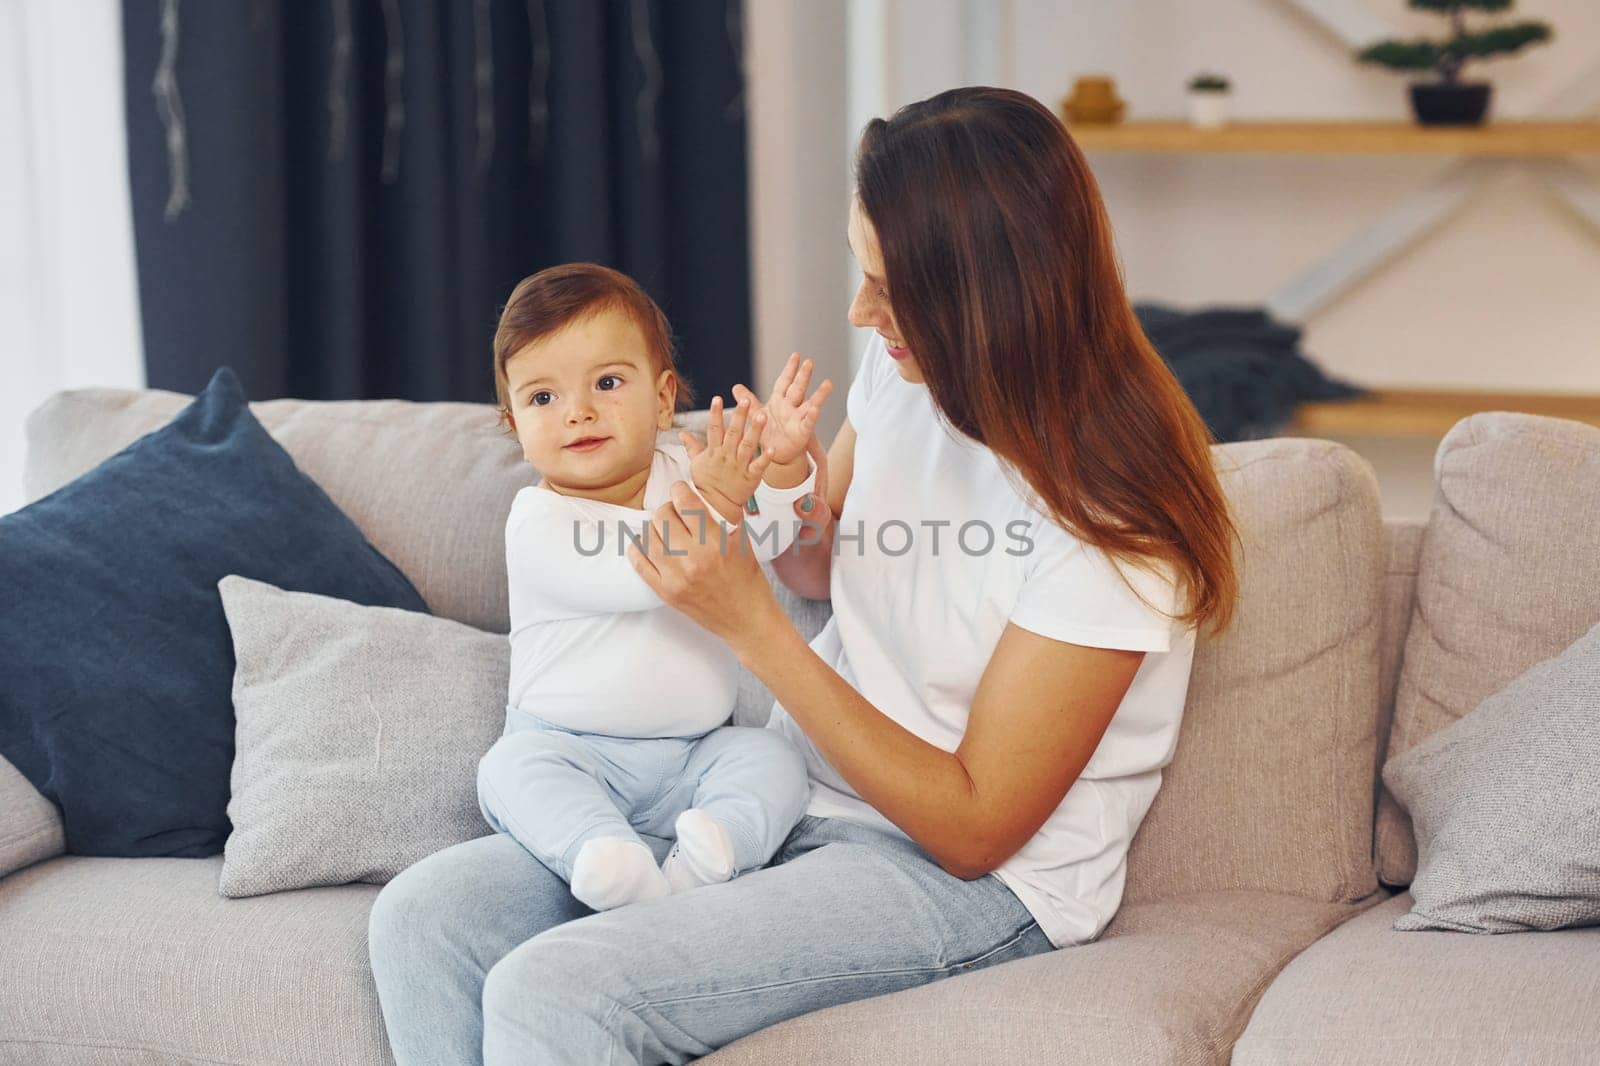 Conception of parenting. Mother with her little daughter is at home together.